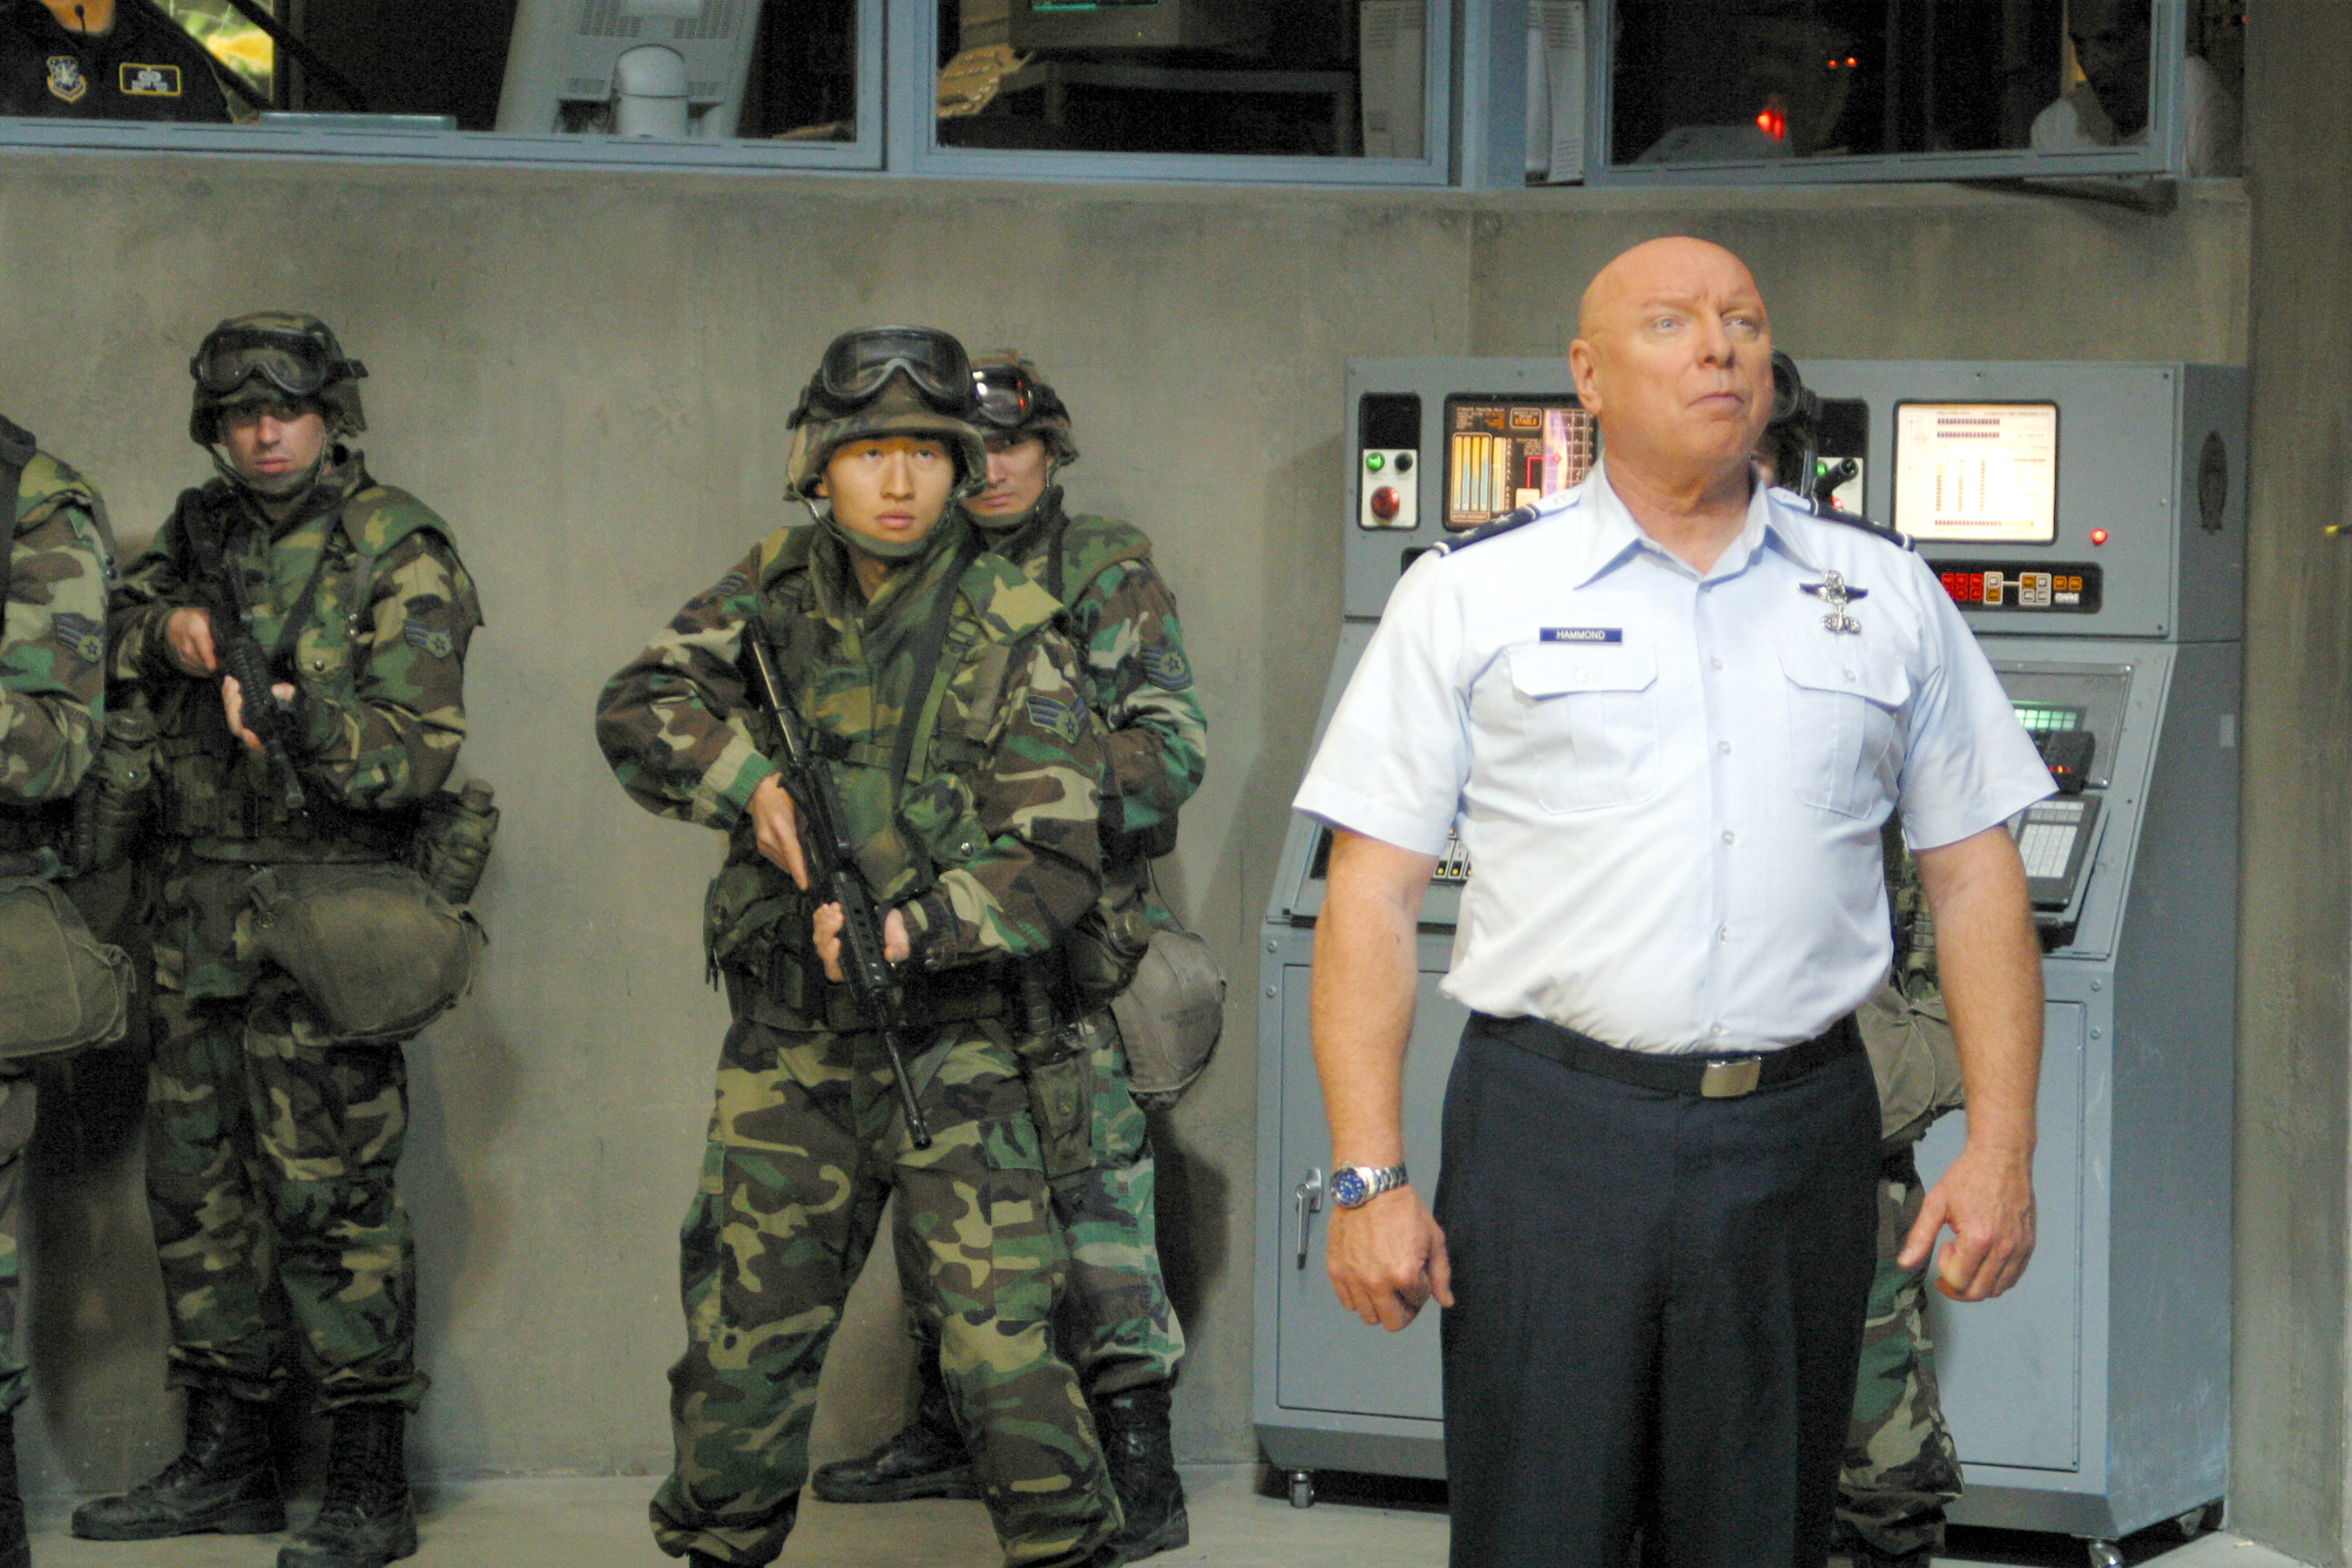 Don in a scene from Stargate